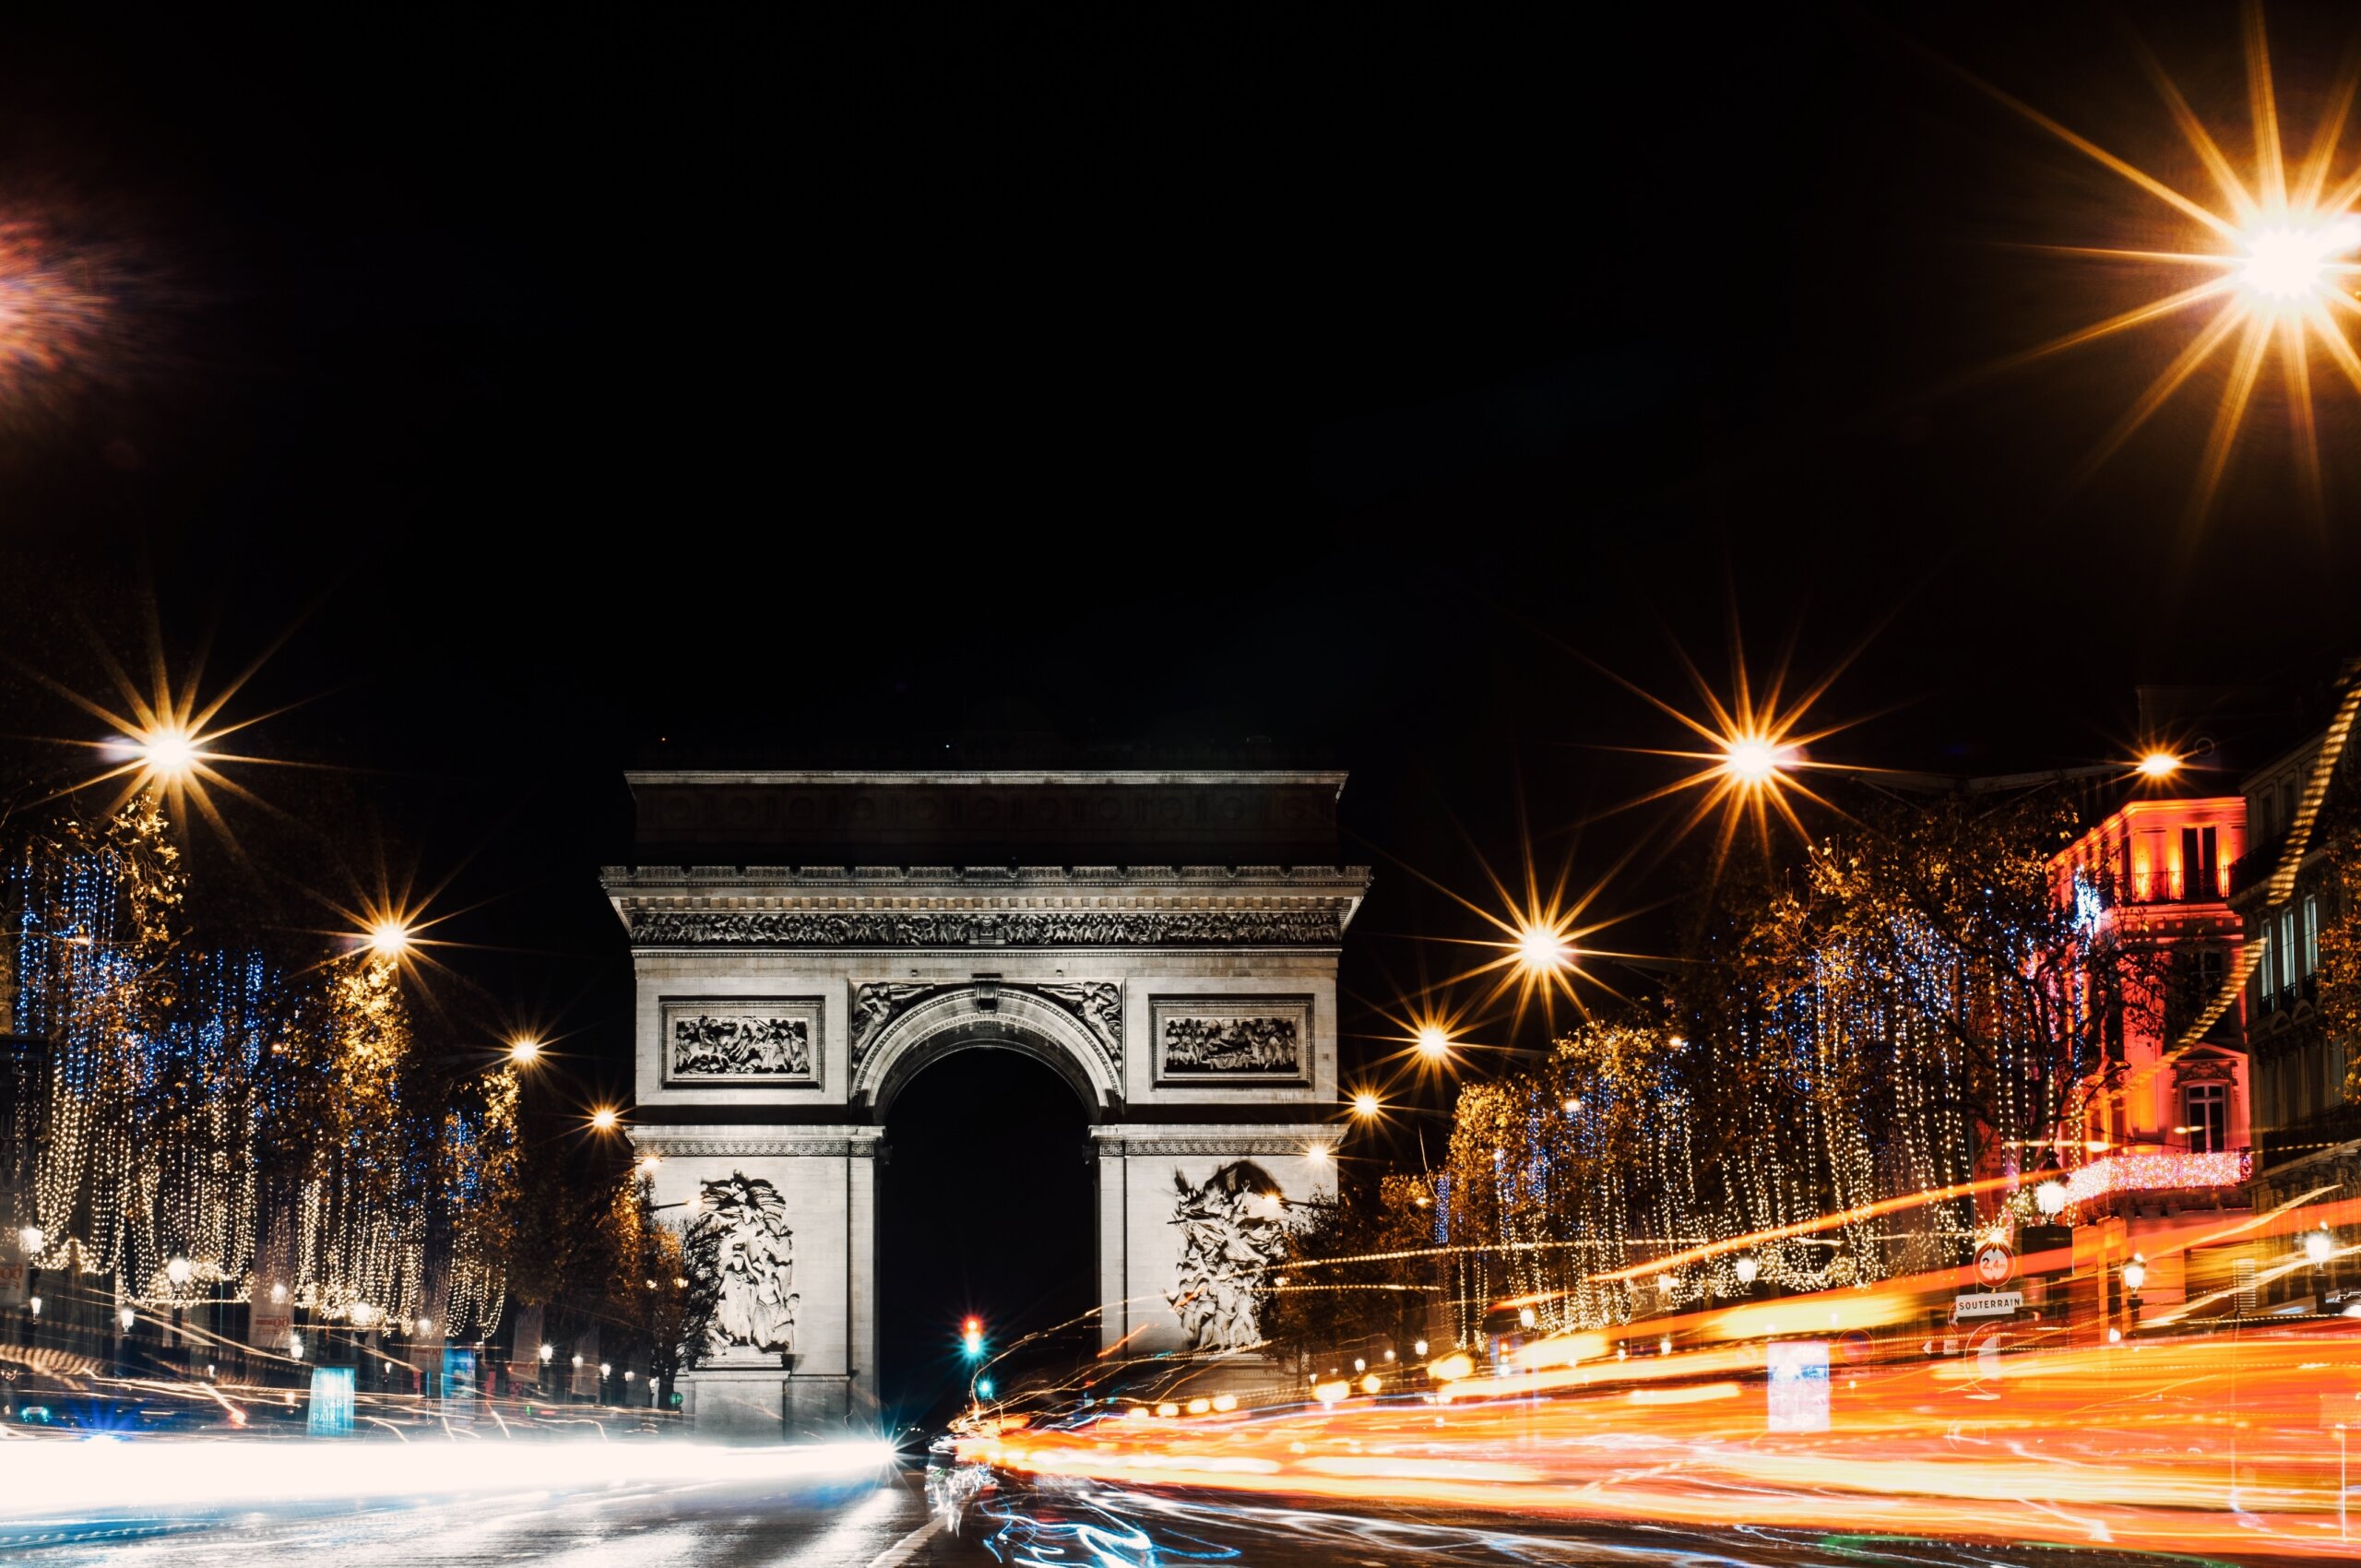 Champs de Elysee at night with Arc de Triomphe